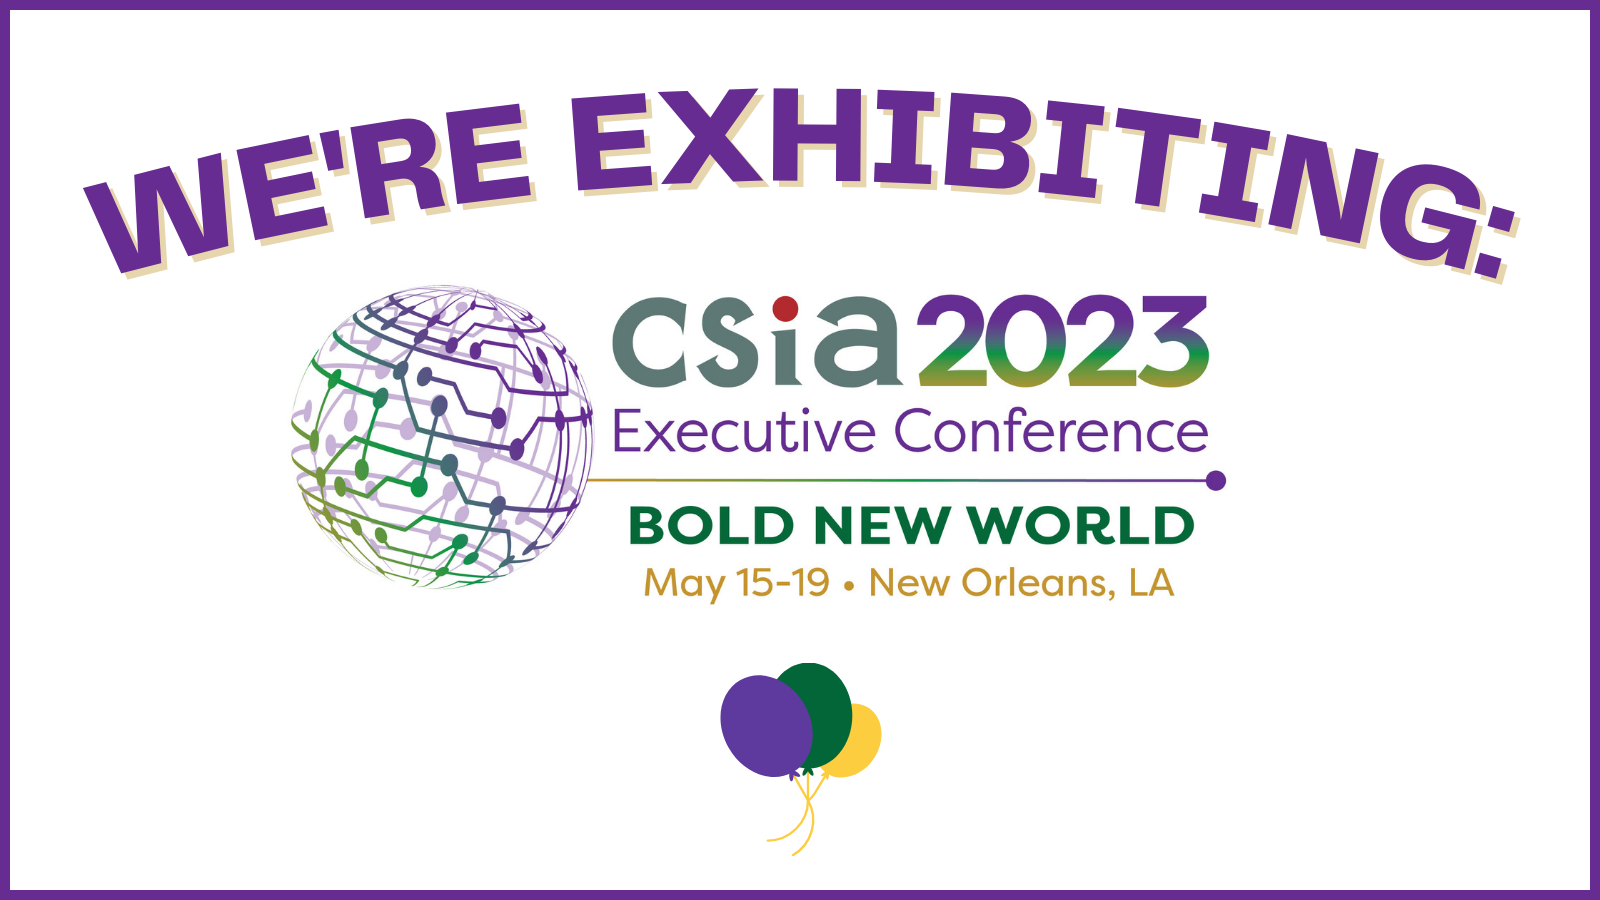 Meet us at the 2023 CSIA Executive Conference, May 1519 in New Orleans